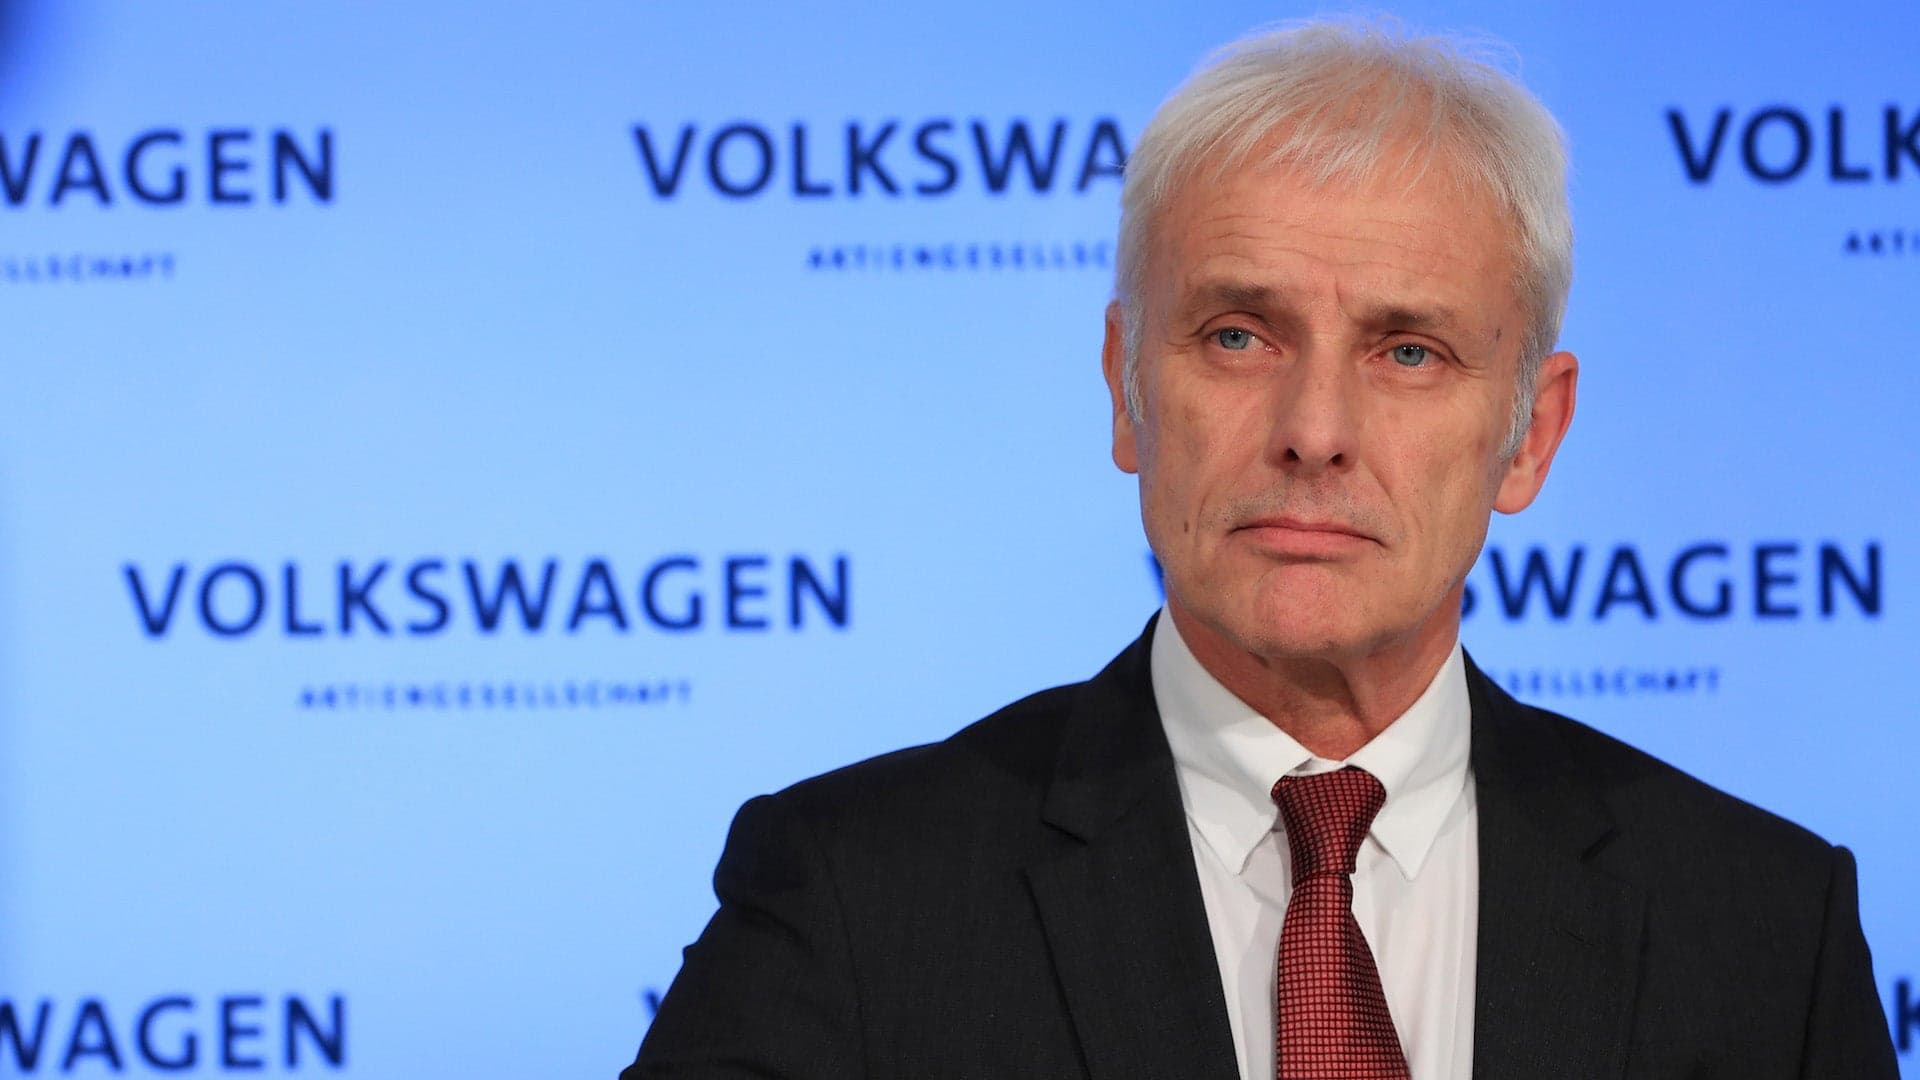 VW CEO Says Brand Could Talk With Fiat Chrysler Over Potential Merger